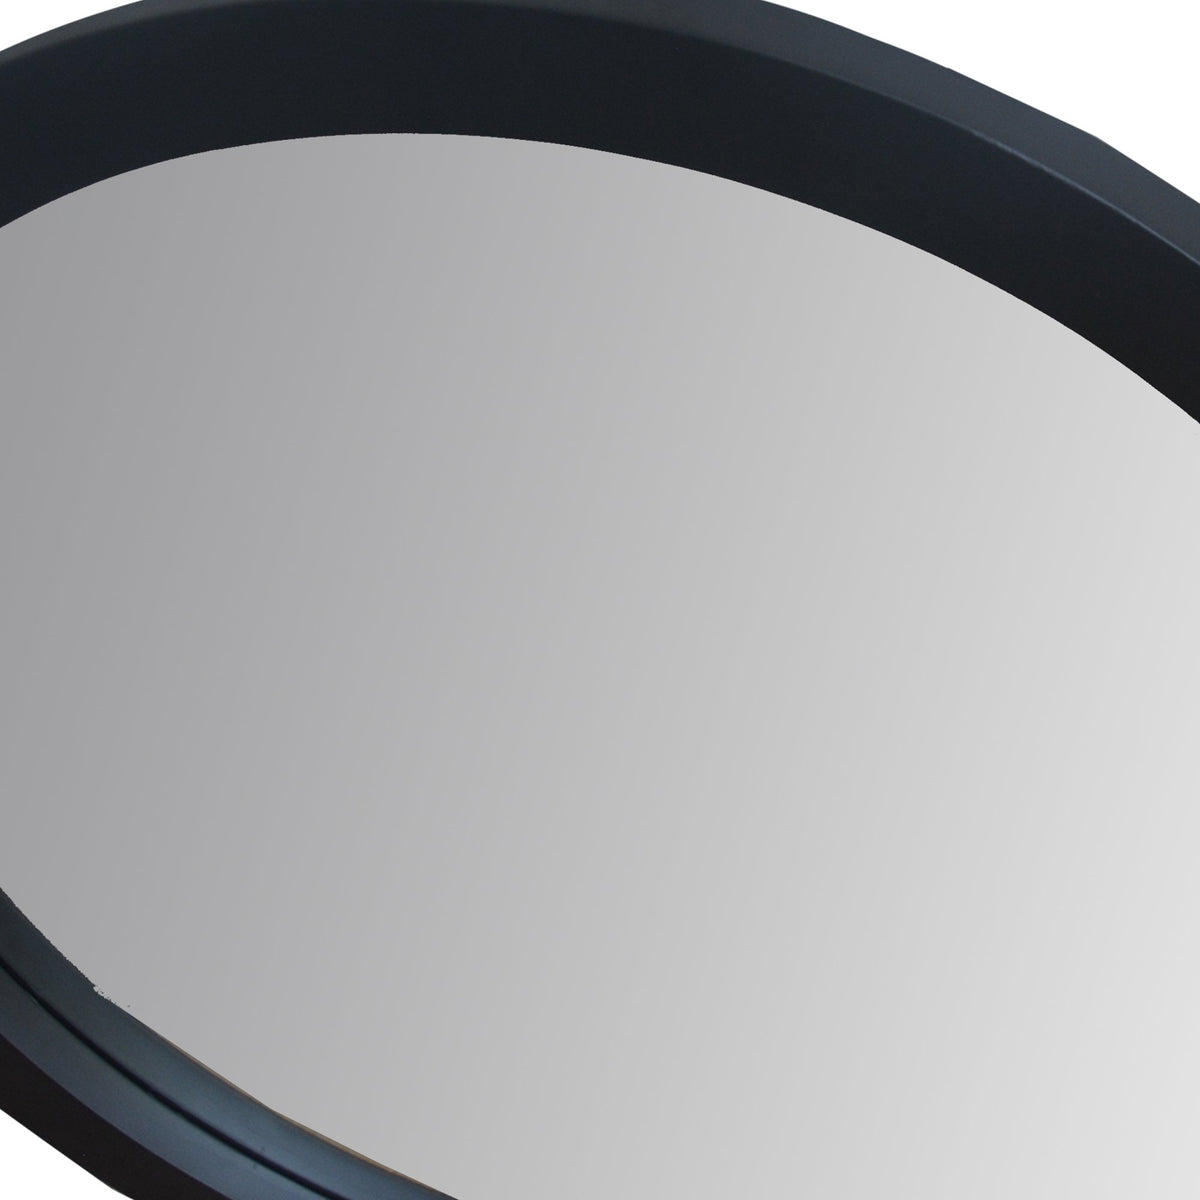 28 Inch Round Wooden Floating Beveled Wall Mirror, Black - UPT-226272